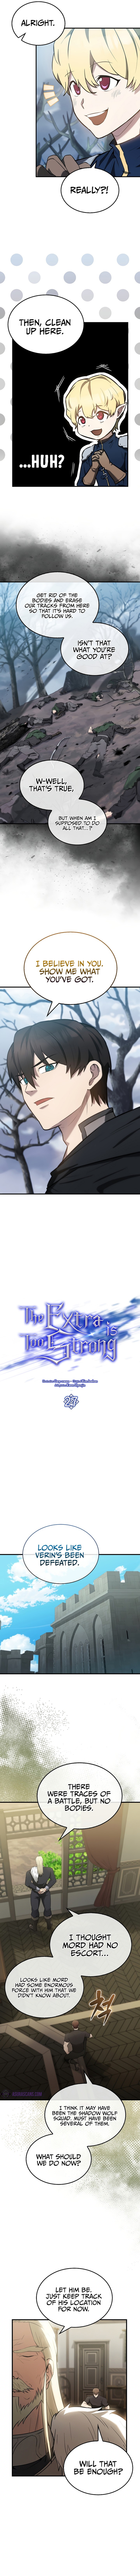 The Extra Is Too Strong 27 4